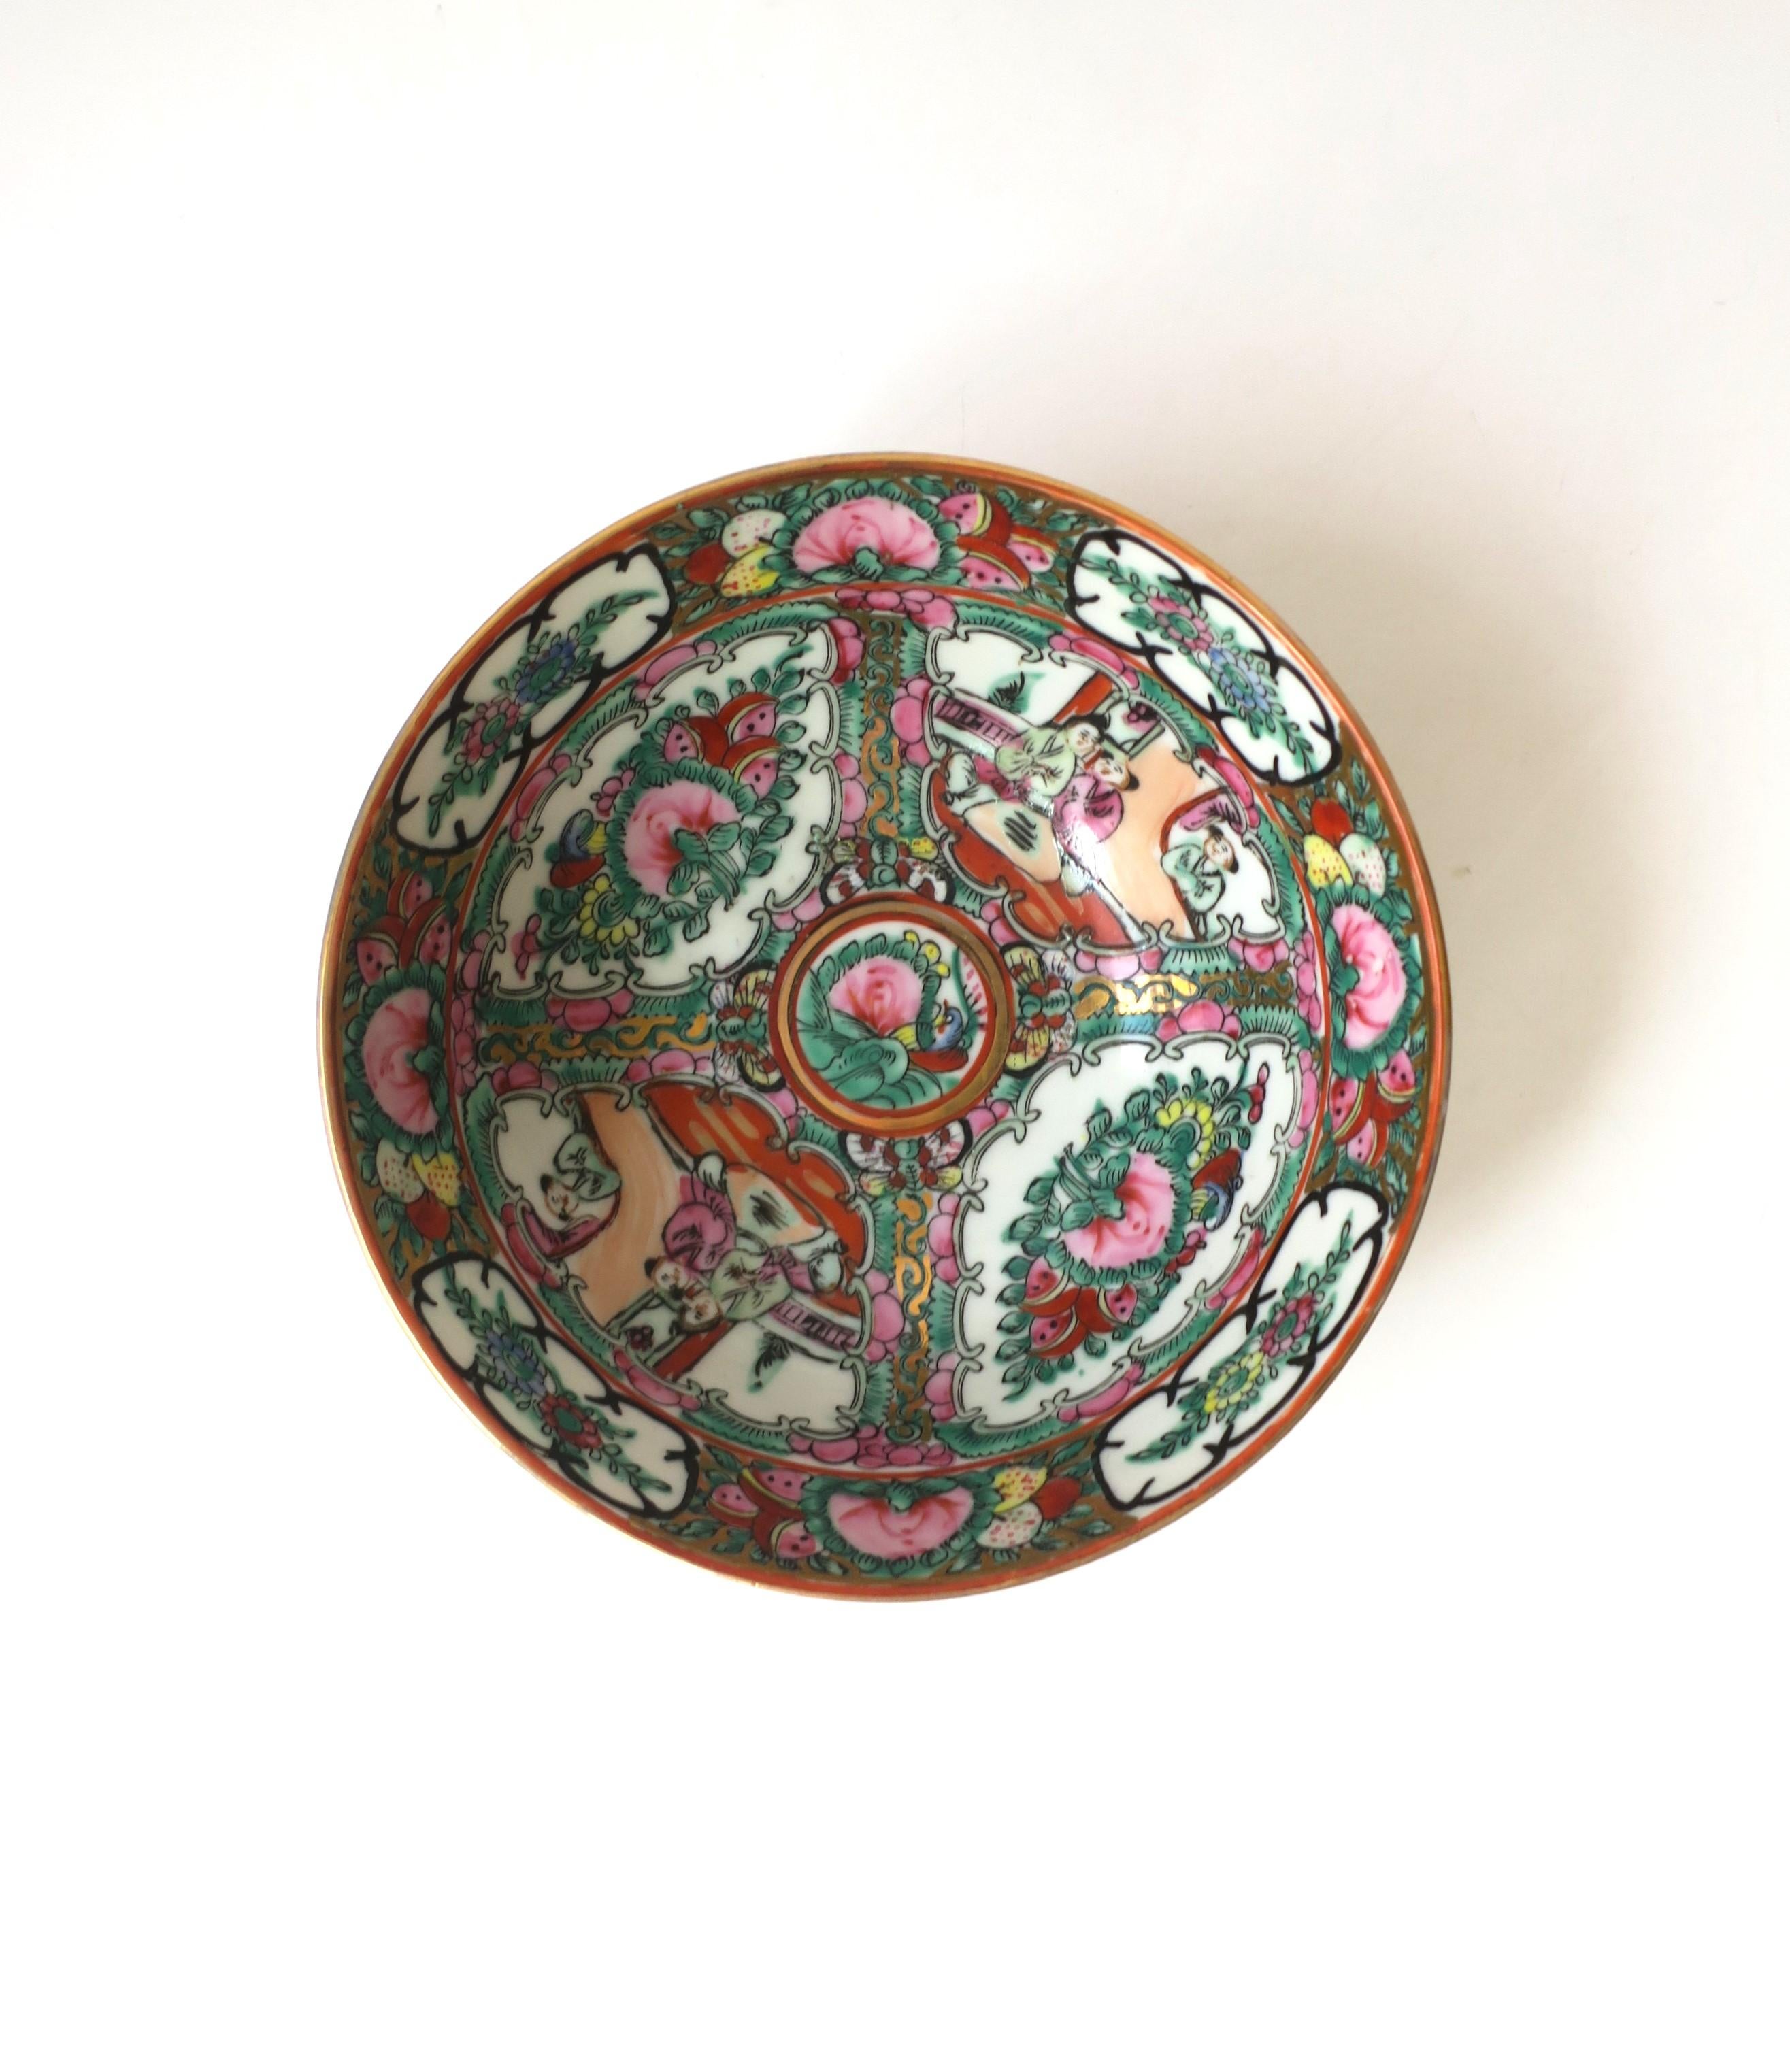 A beautiful Famille Rose pink medallion decorated ceramic bowl in Chinoiserie style, circa mid-20th century, China. Colors include pinks, greens, black and gold. Very good condition as shown in images. No chips noted. Dimensions: 2.88